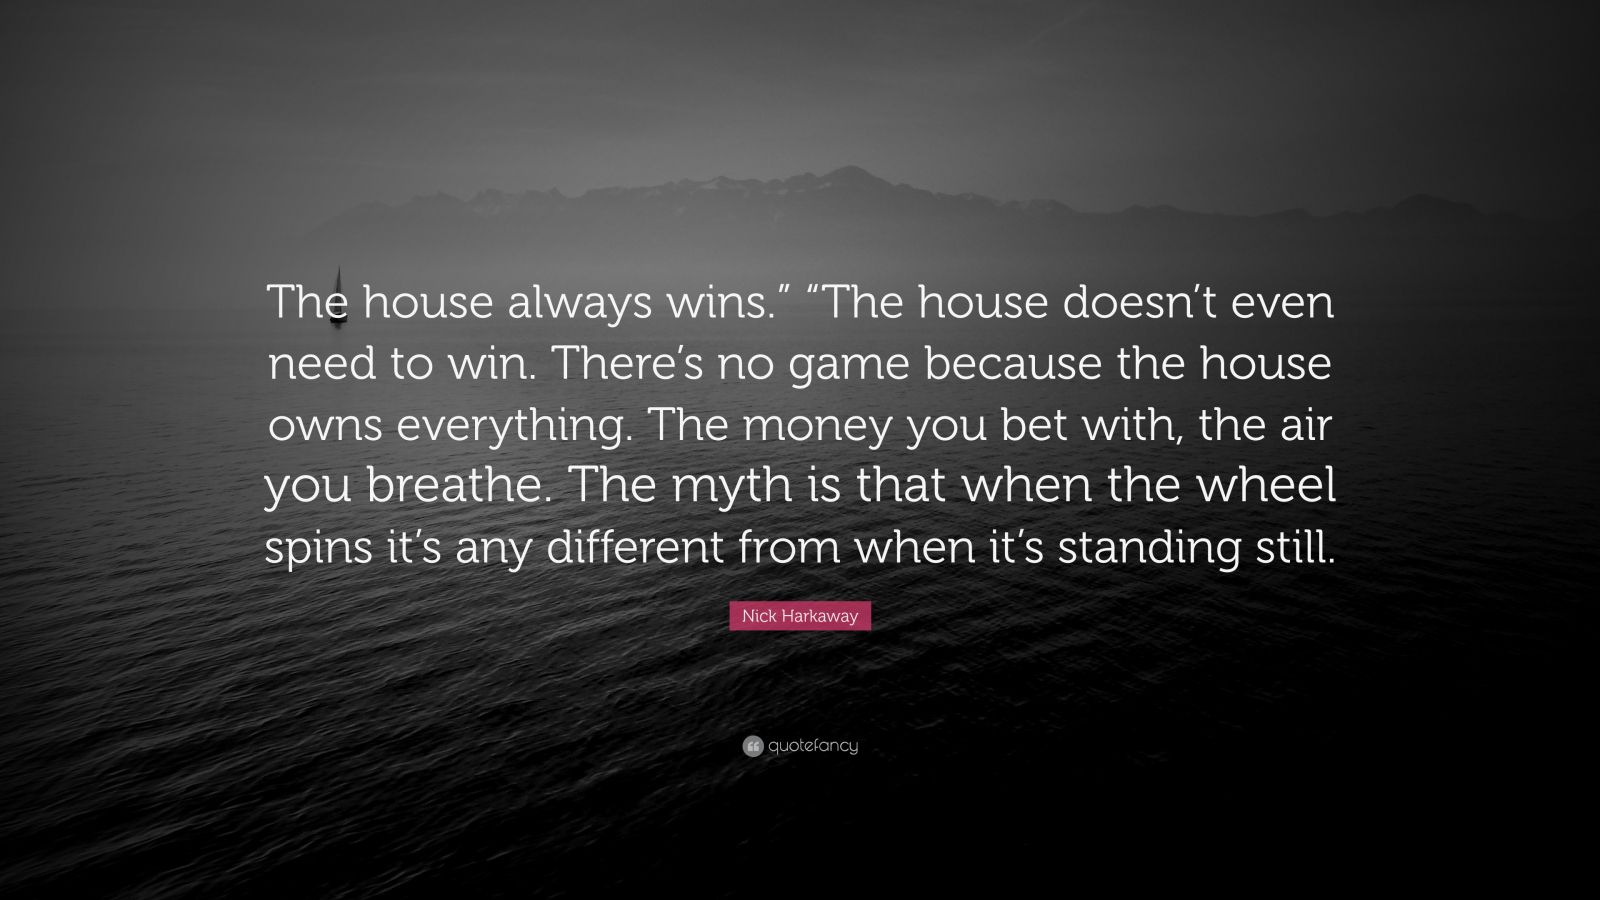 https://quotefancy.com/media/wallpaper/1600x900/8119540-Nick-Harkaway-Quote-The-house-always-wins-The-house-doesn-t-even-need-to-win-There-s.jpg